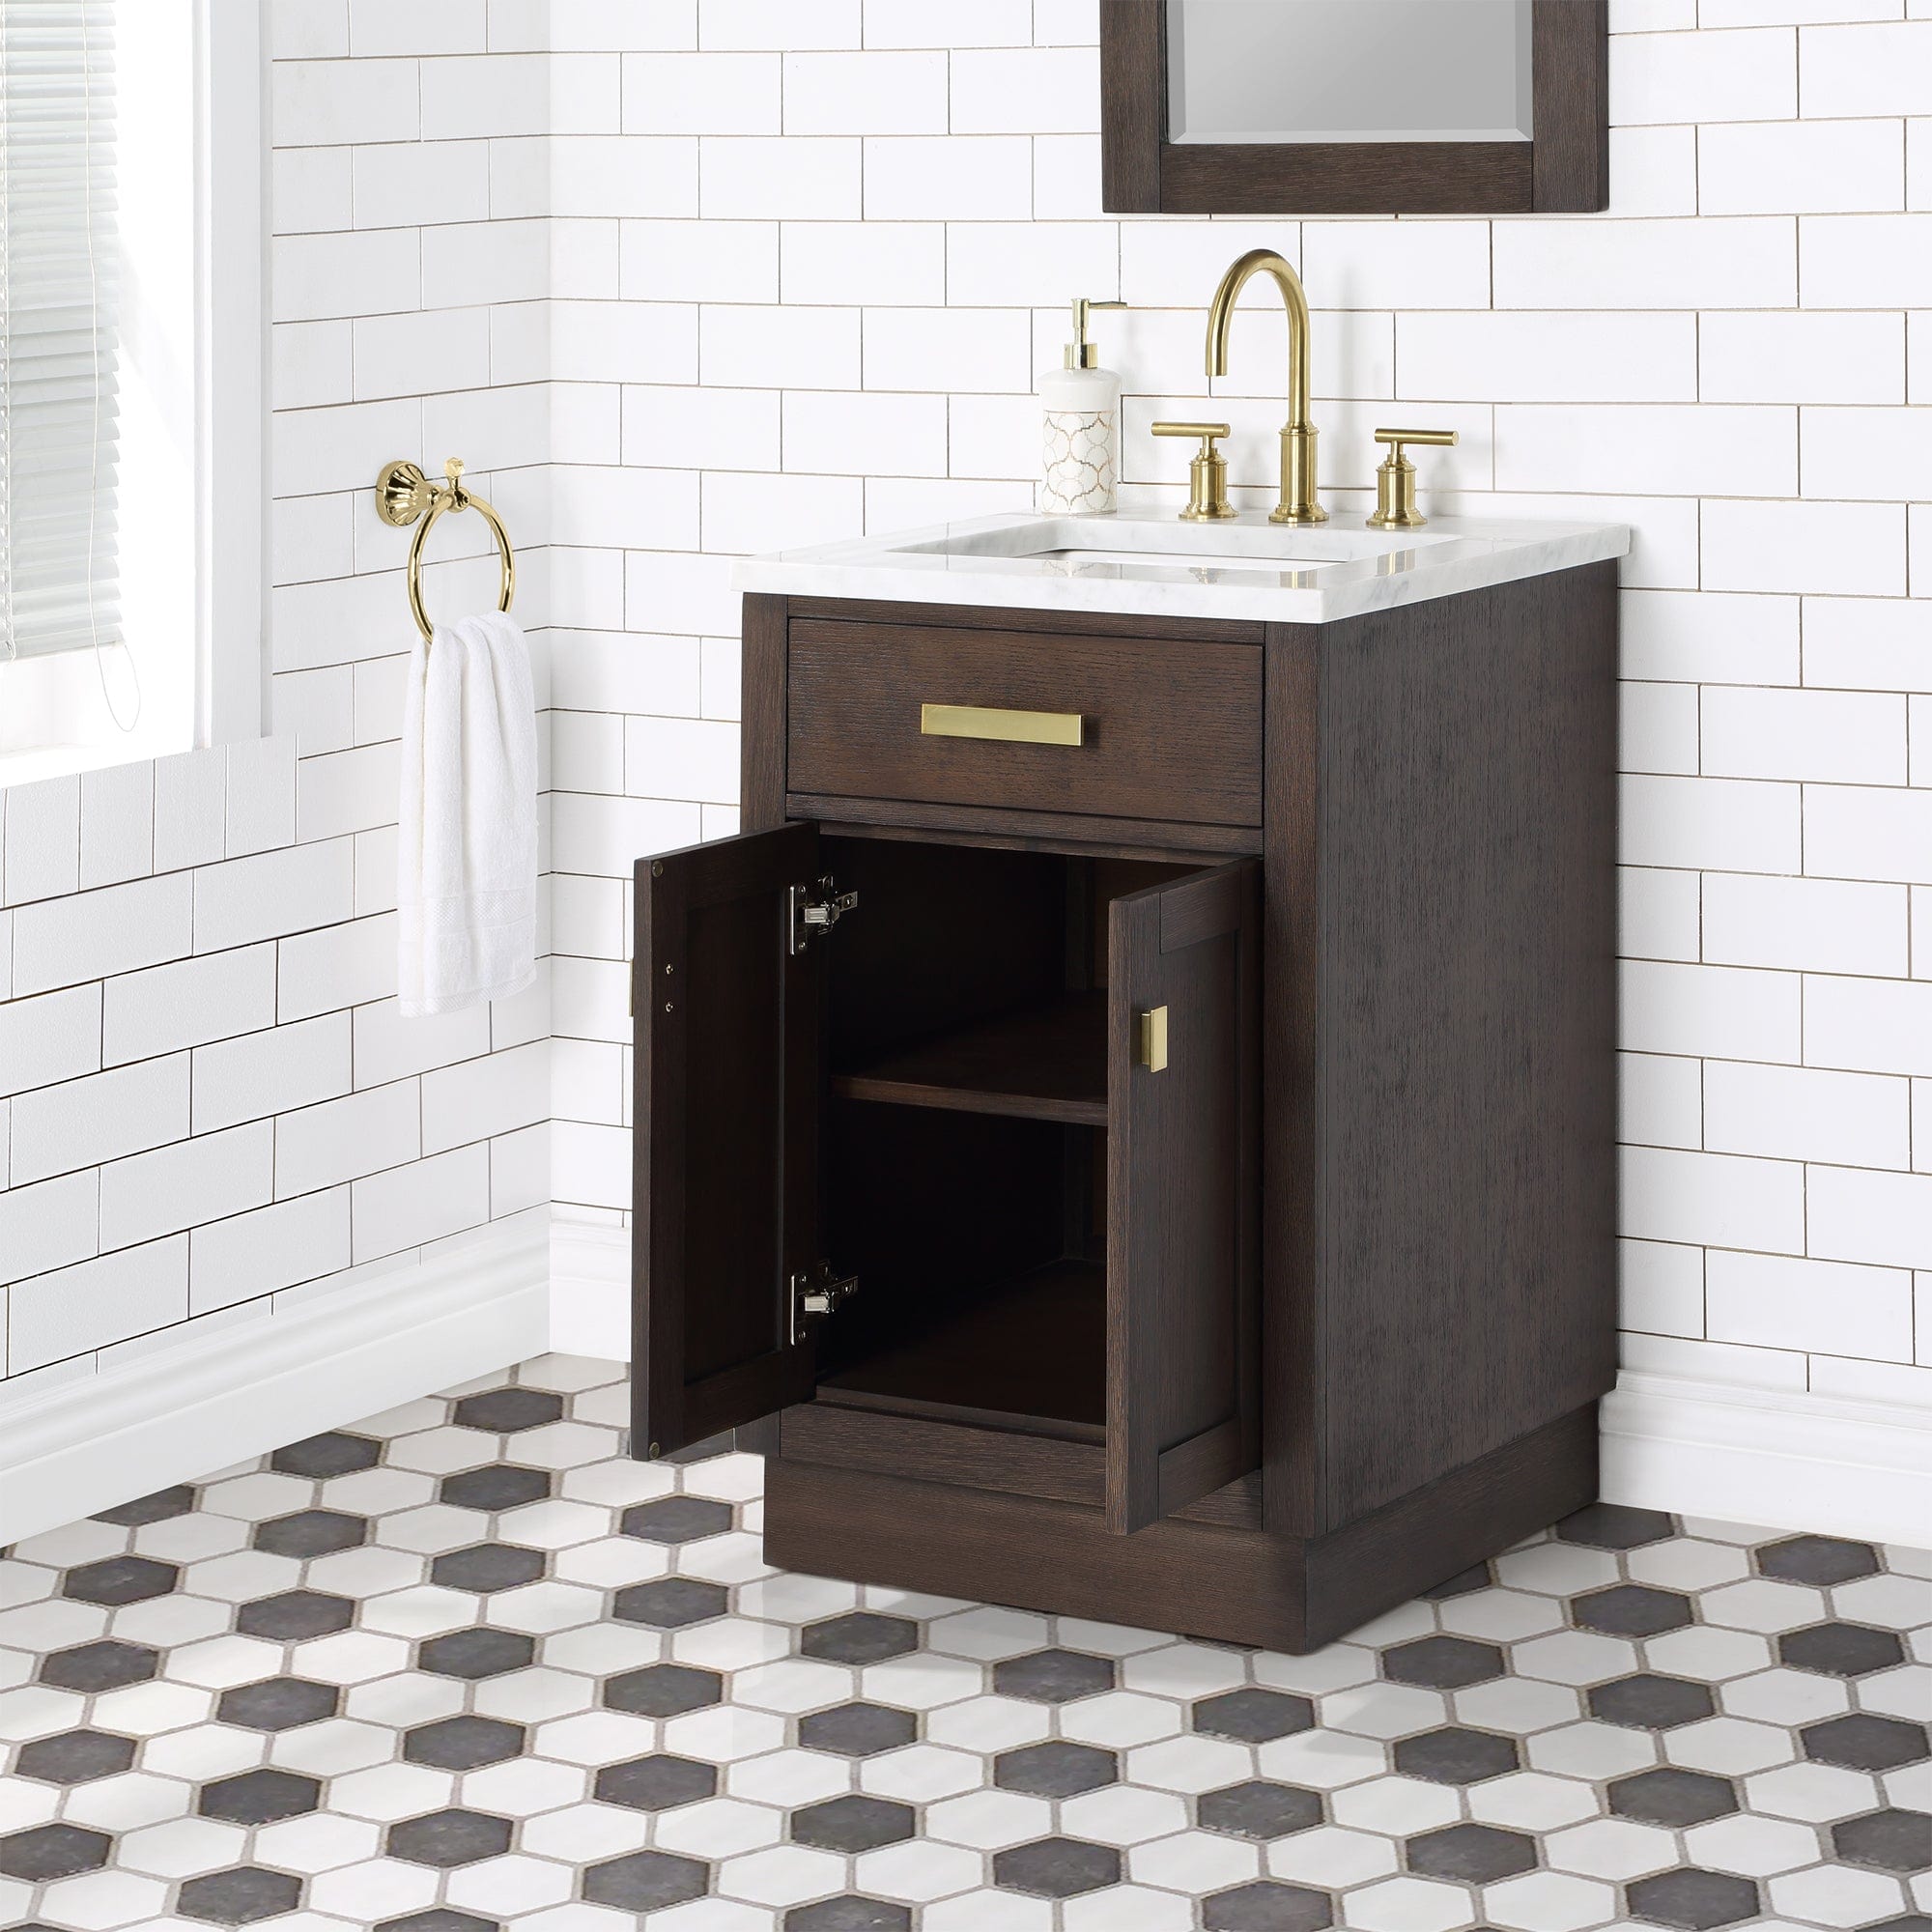 Chestnut 24 In. Single Sink Carrara White Marble Countertop Vanity In Brown Oak with Mirror - Molaix732030764569CH24CW06BK-R21000000